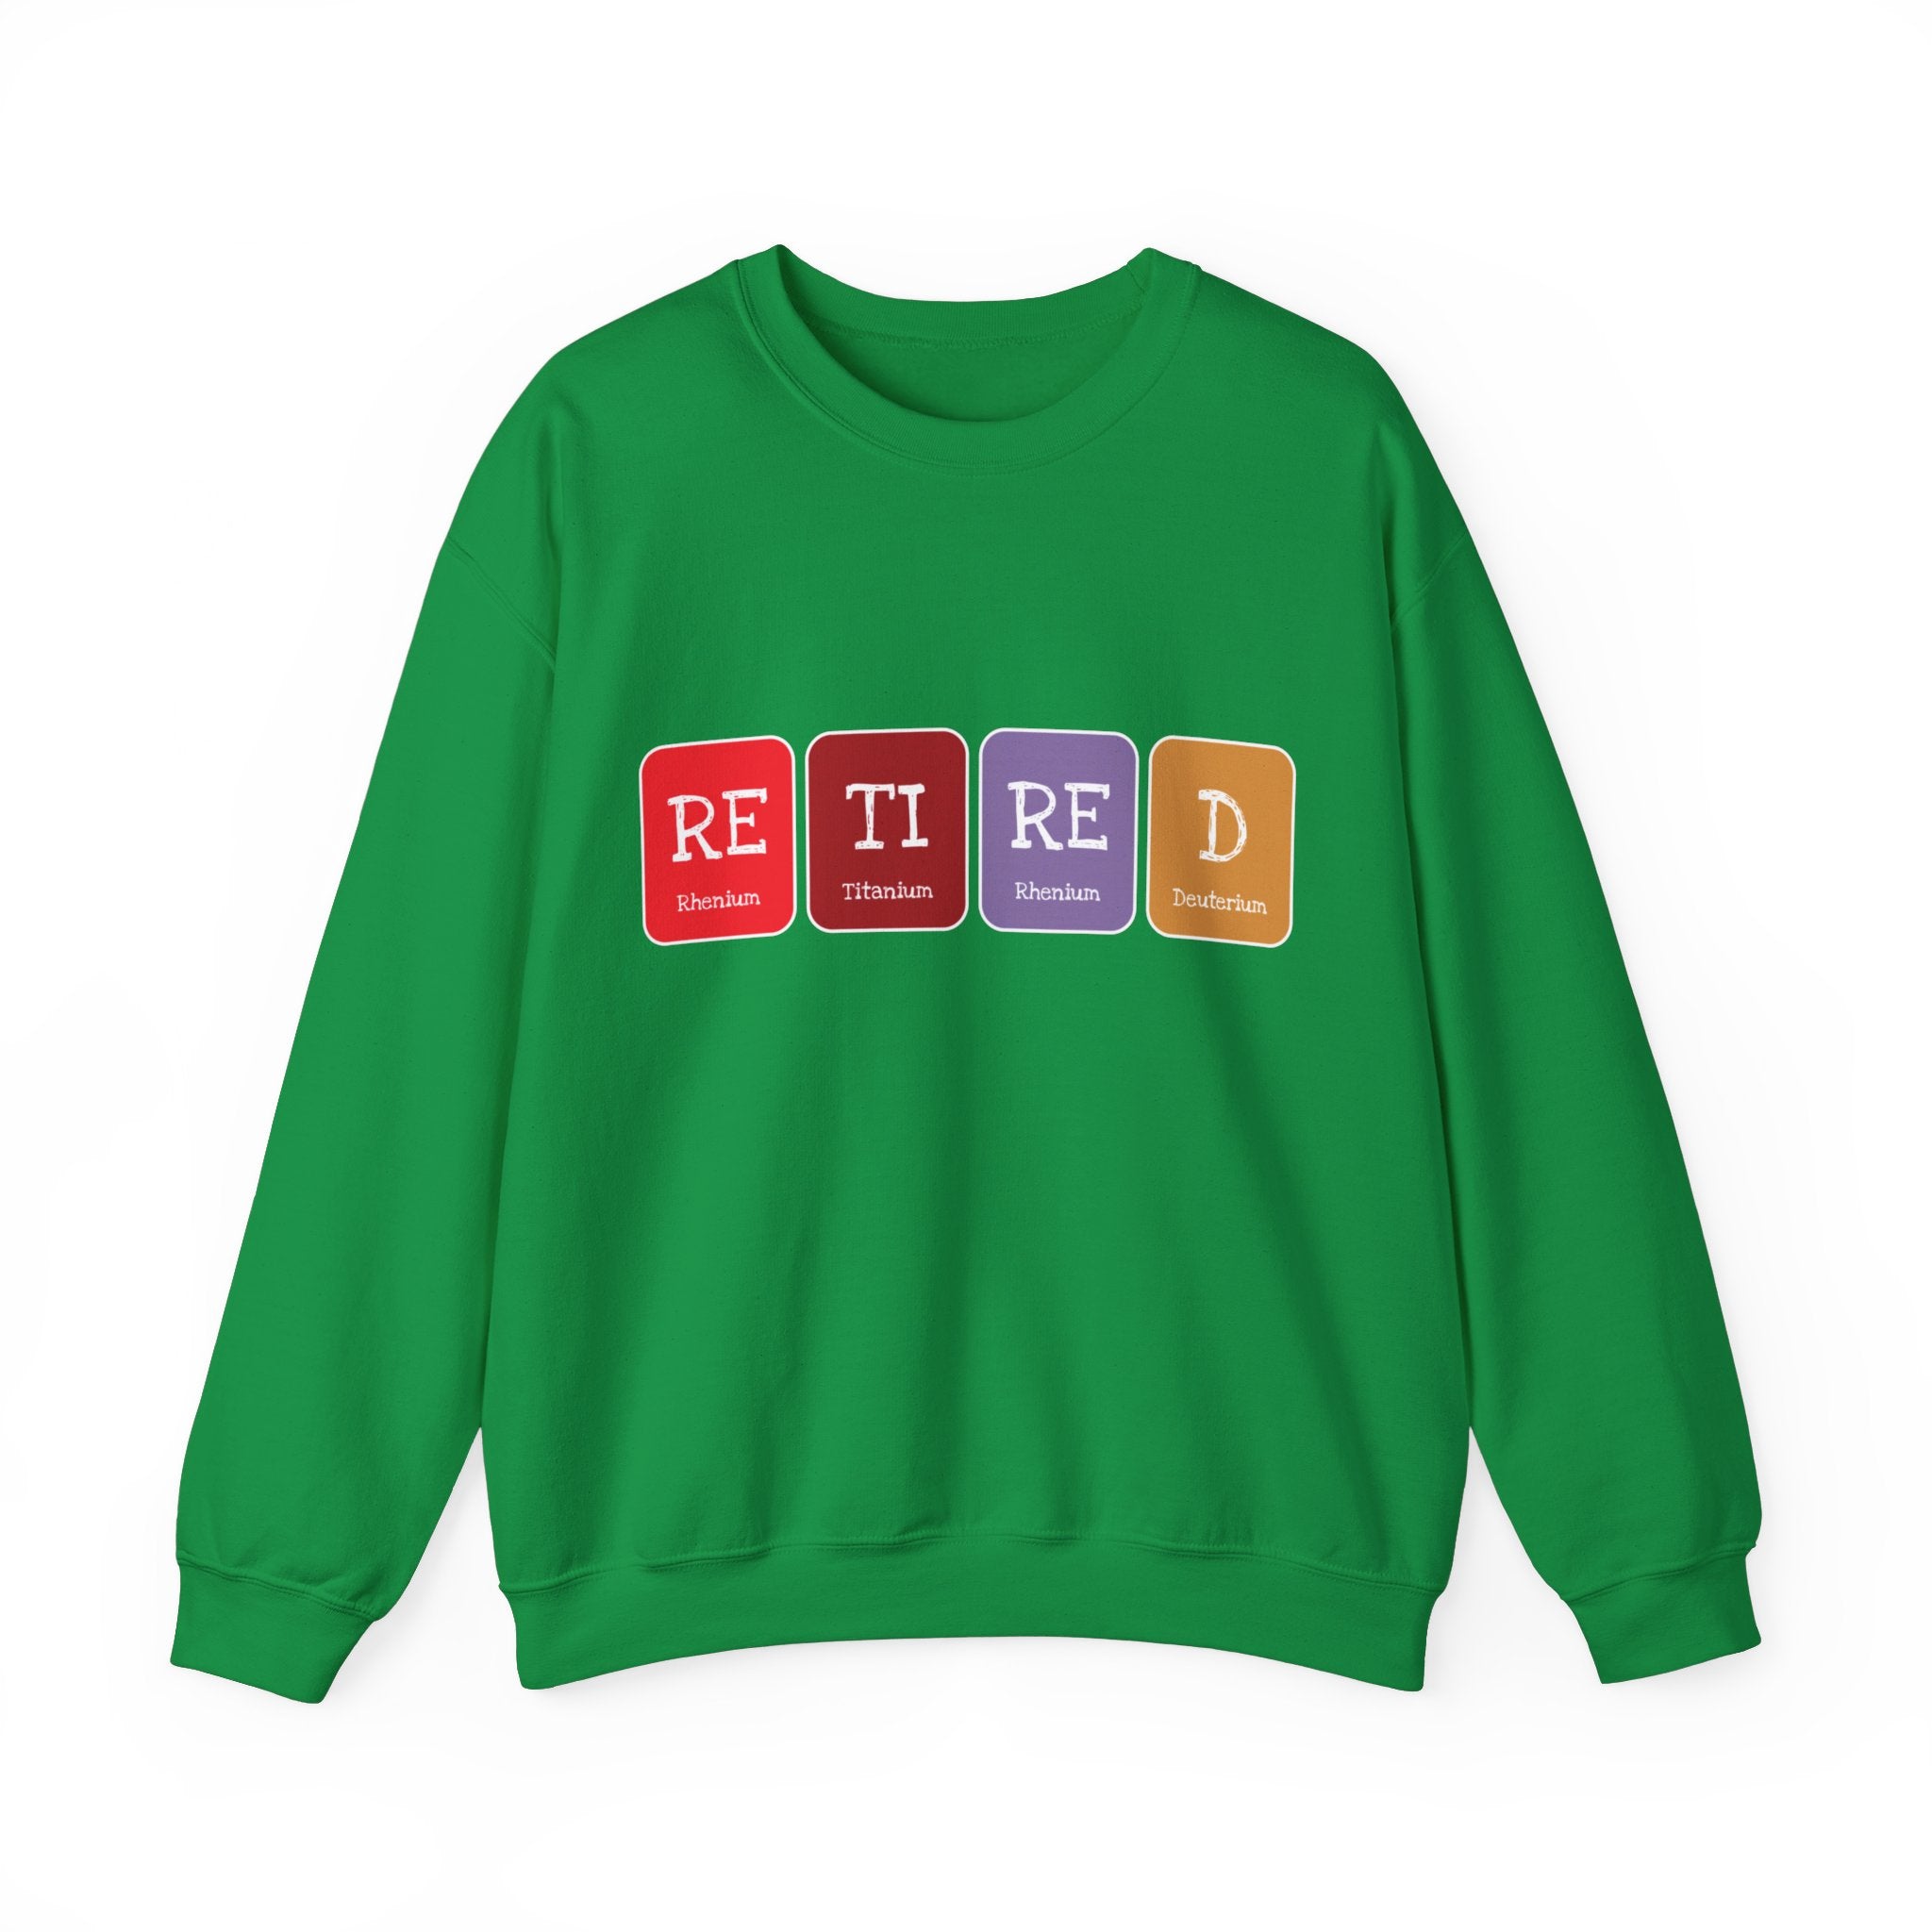 A comfortable green Retired - Sweatshirt with the word "RETIRED" displayed in vibrant colored blocks on the front.